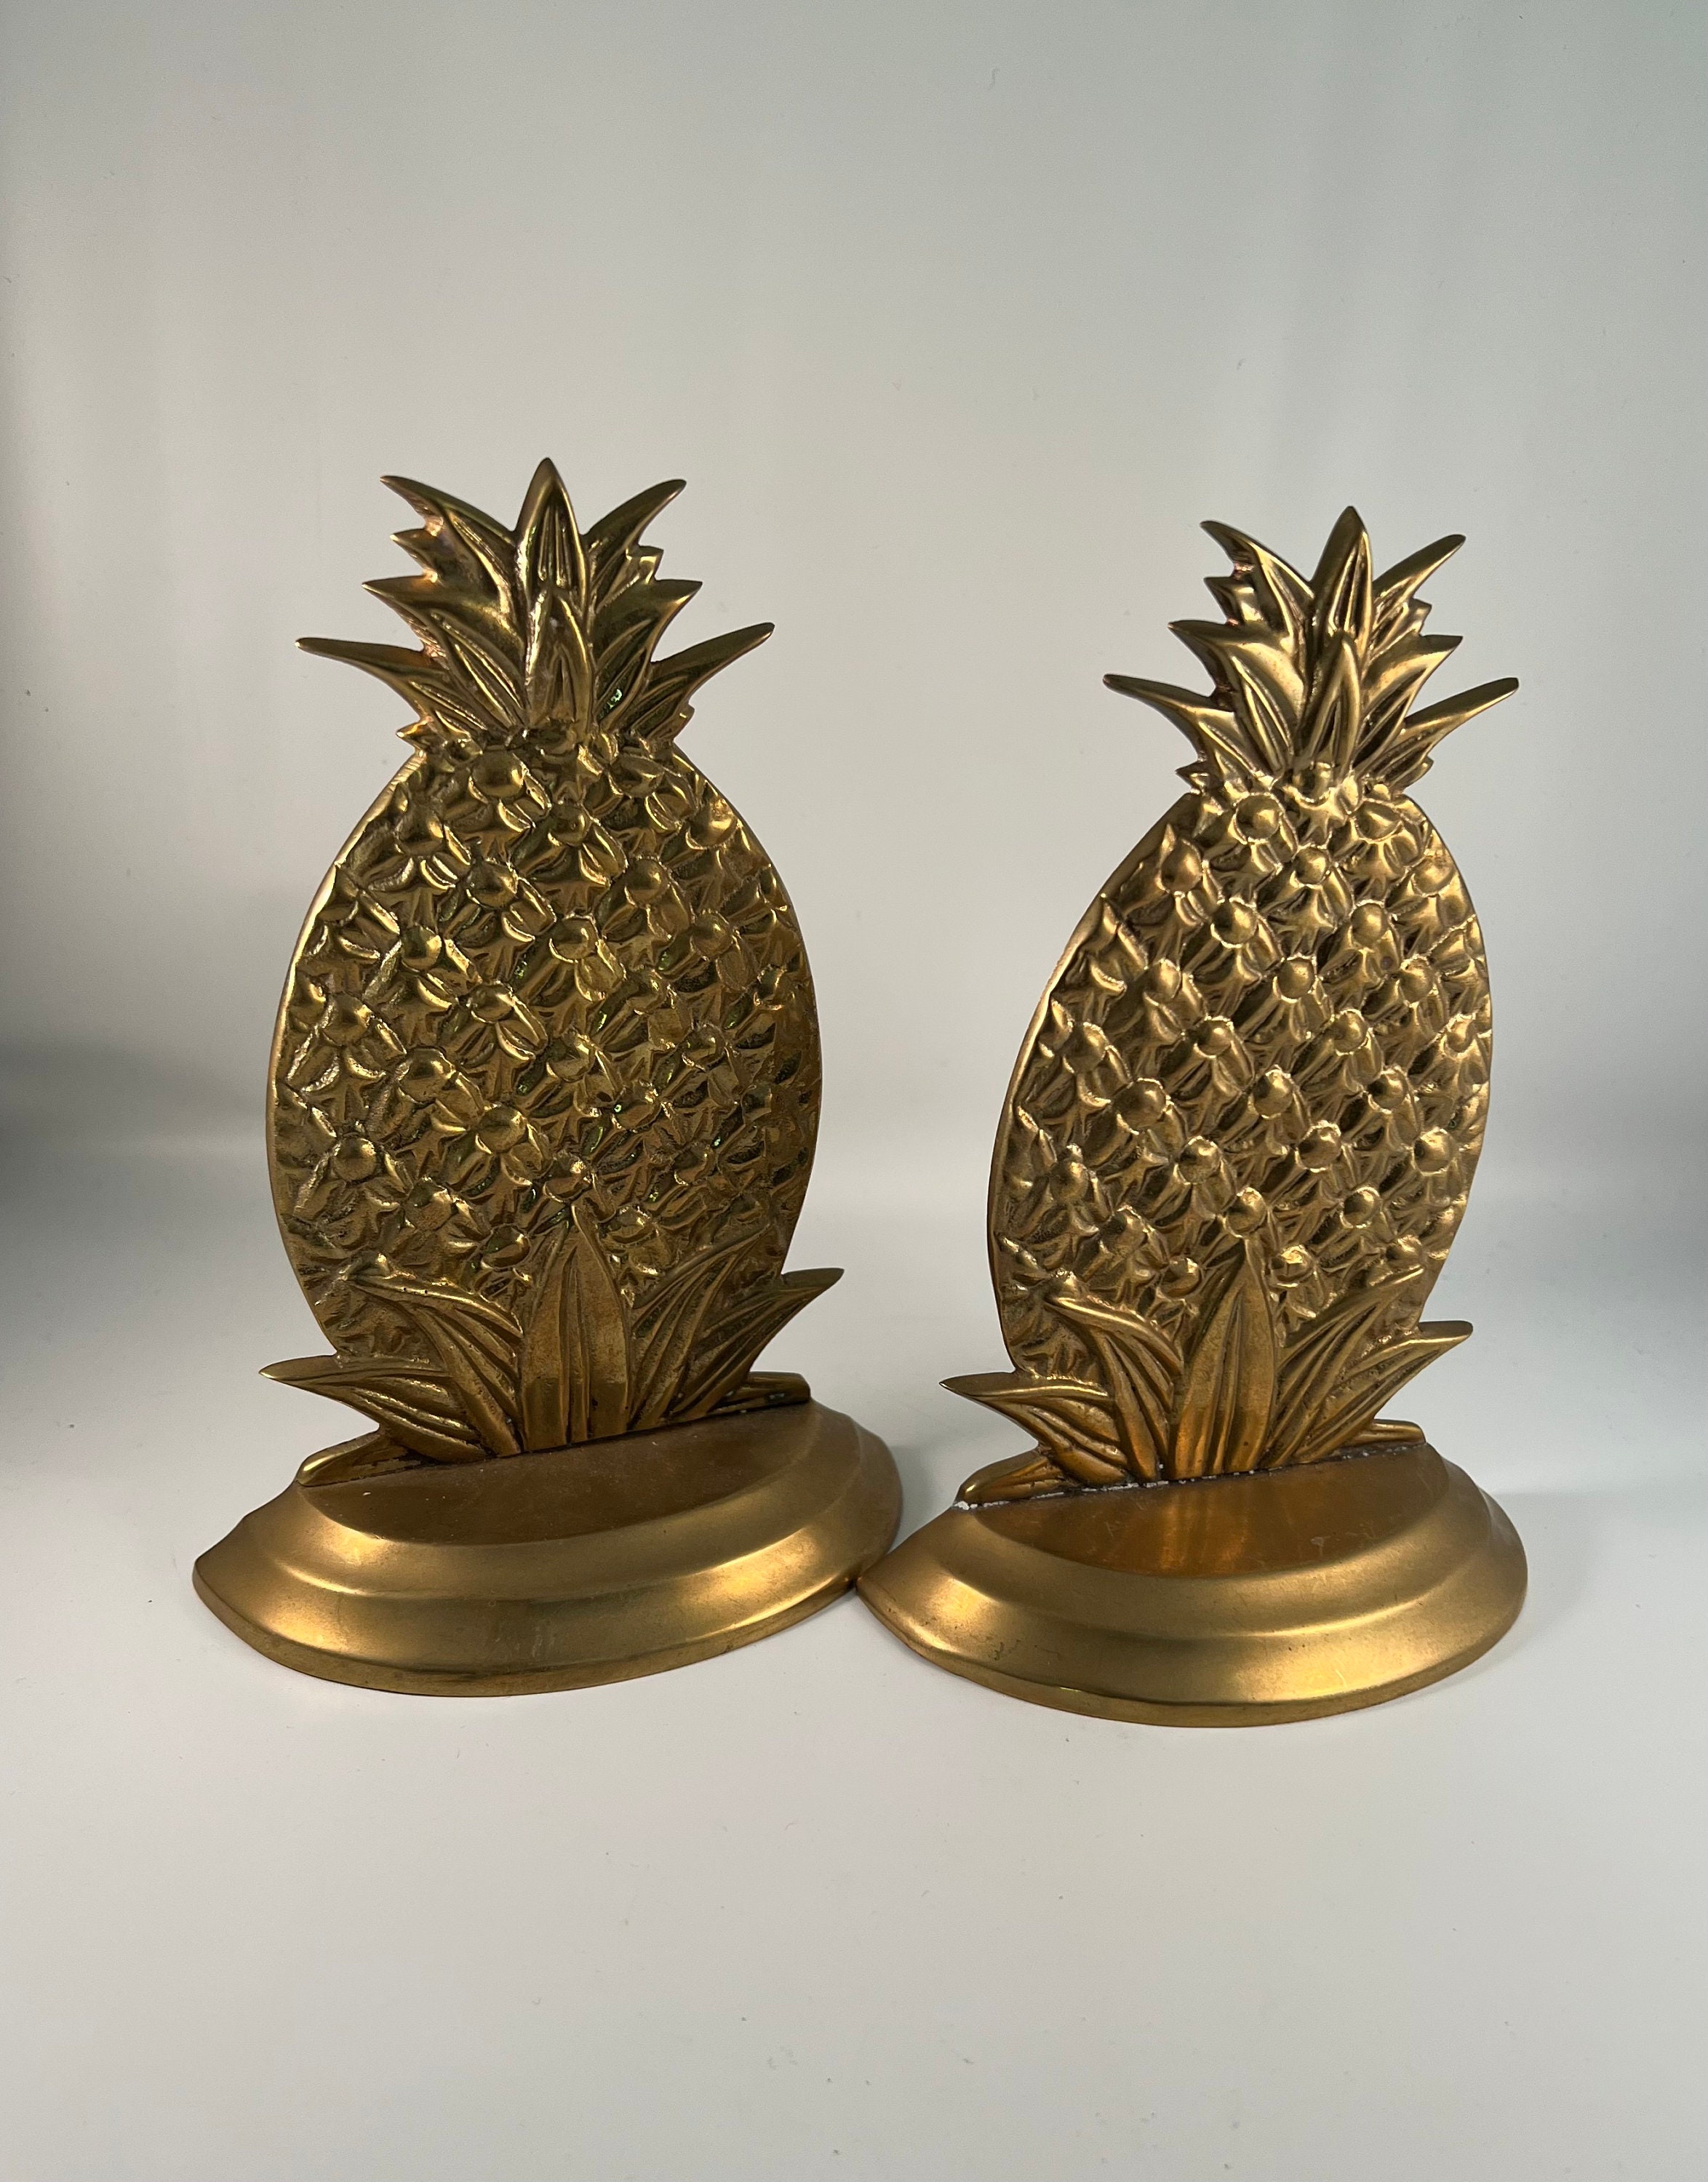 20cm Pair Of Golden Pineapple Bookends With Distressed Finish Art Deco H 